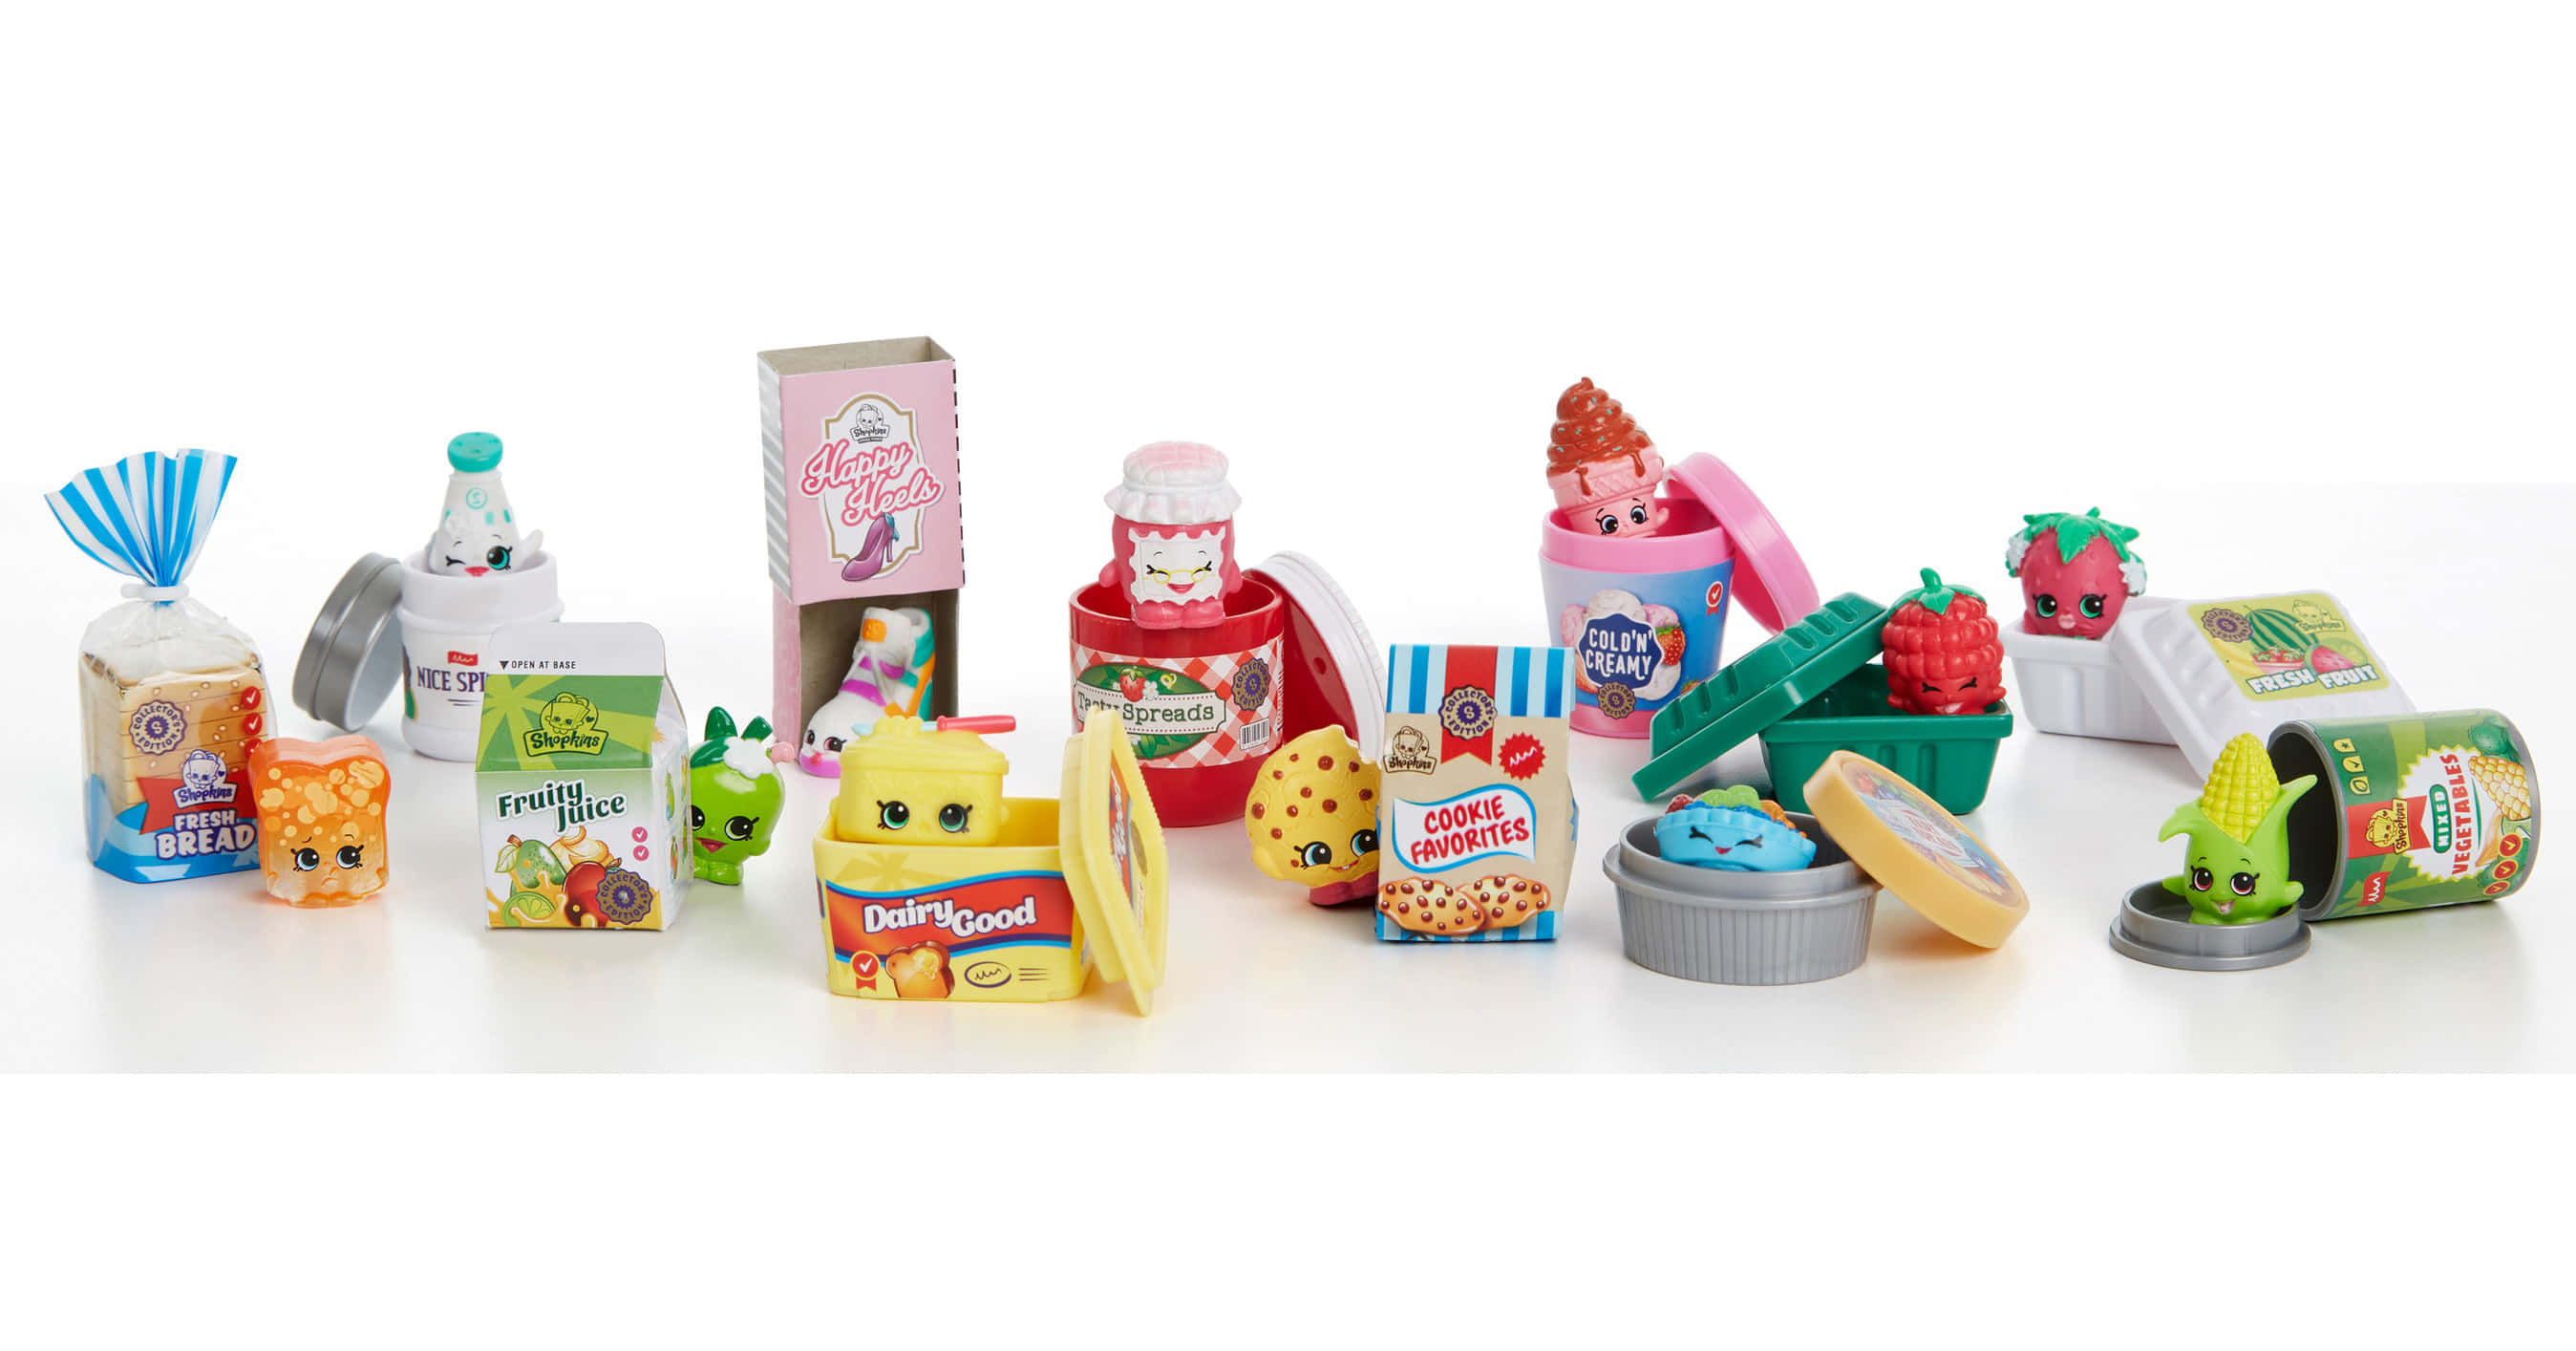 Caption: Colorful and Fun Shopkins Characters Collection